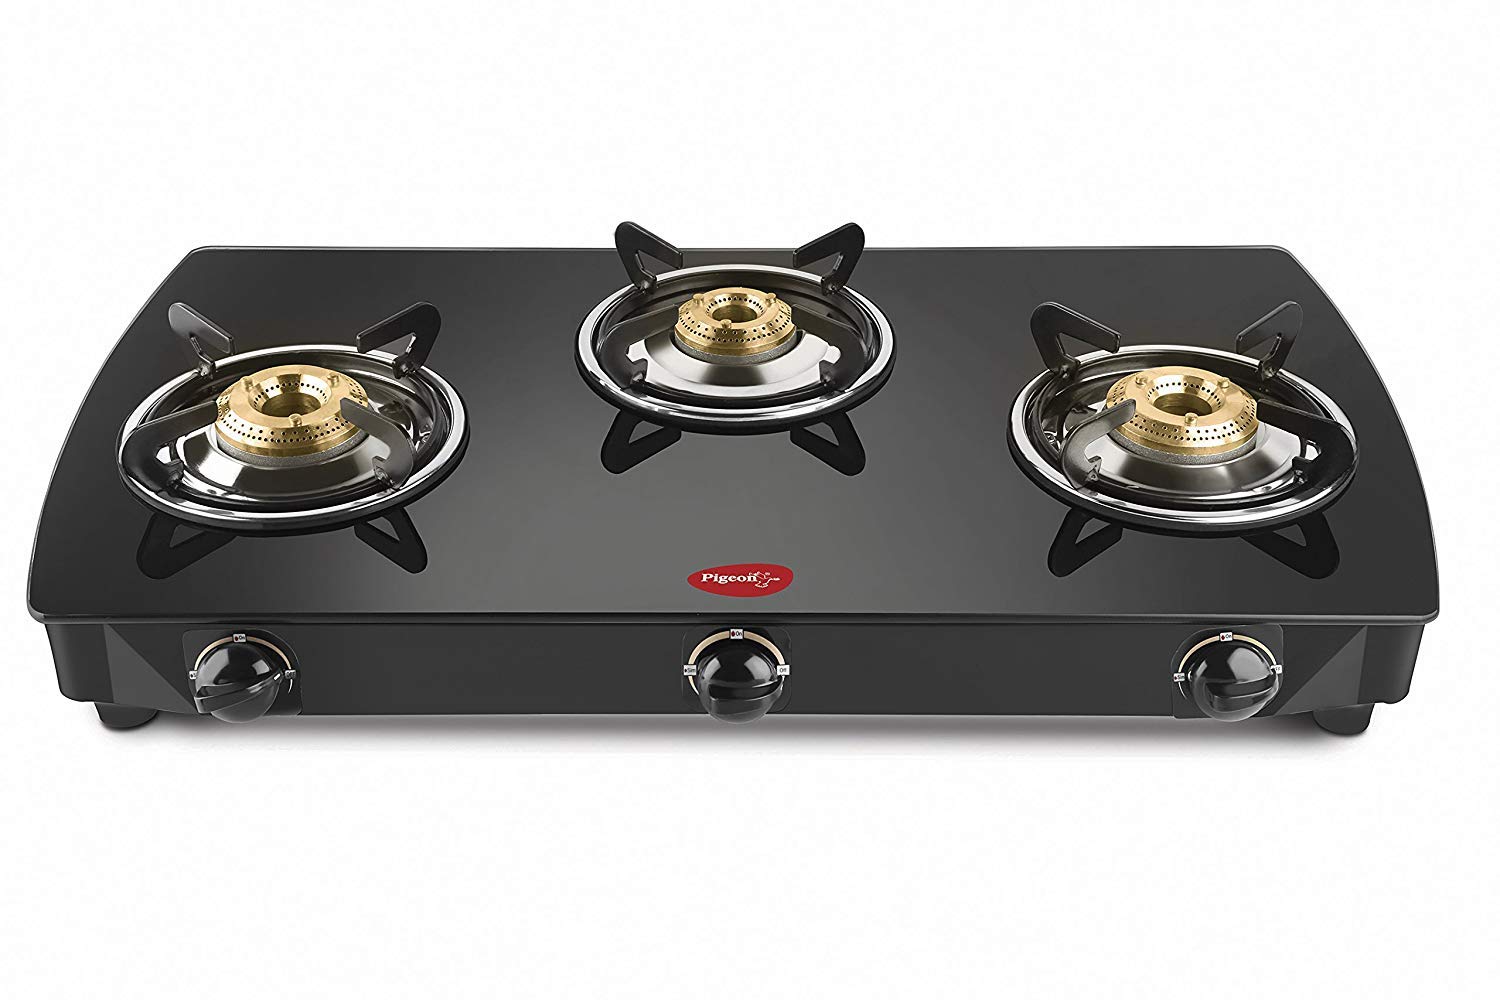 Pigeon Stovekraft Brunet 3 Burners Stainless Steel and Glass Top Gas Stove with Heavy Brass Burner  Black 